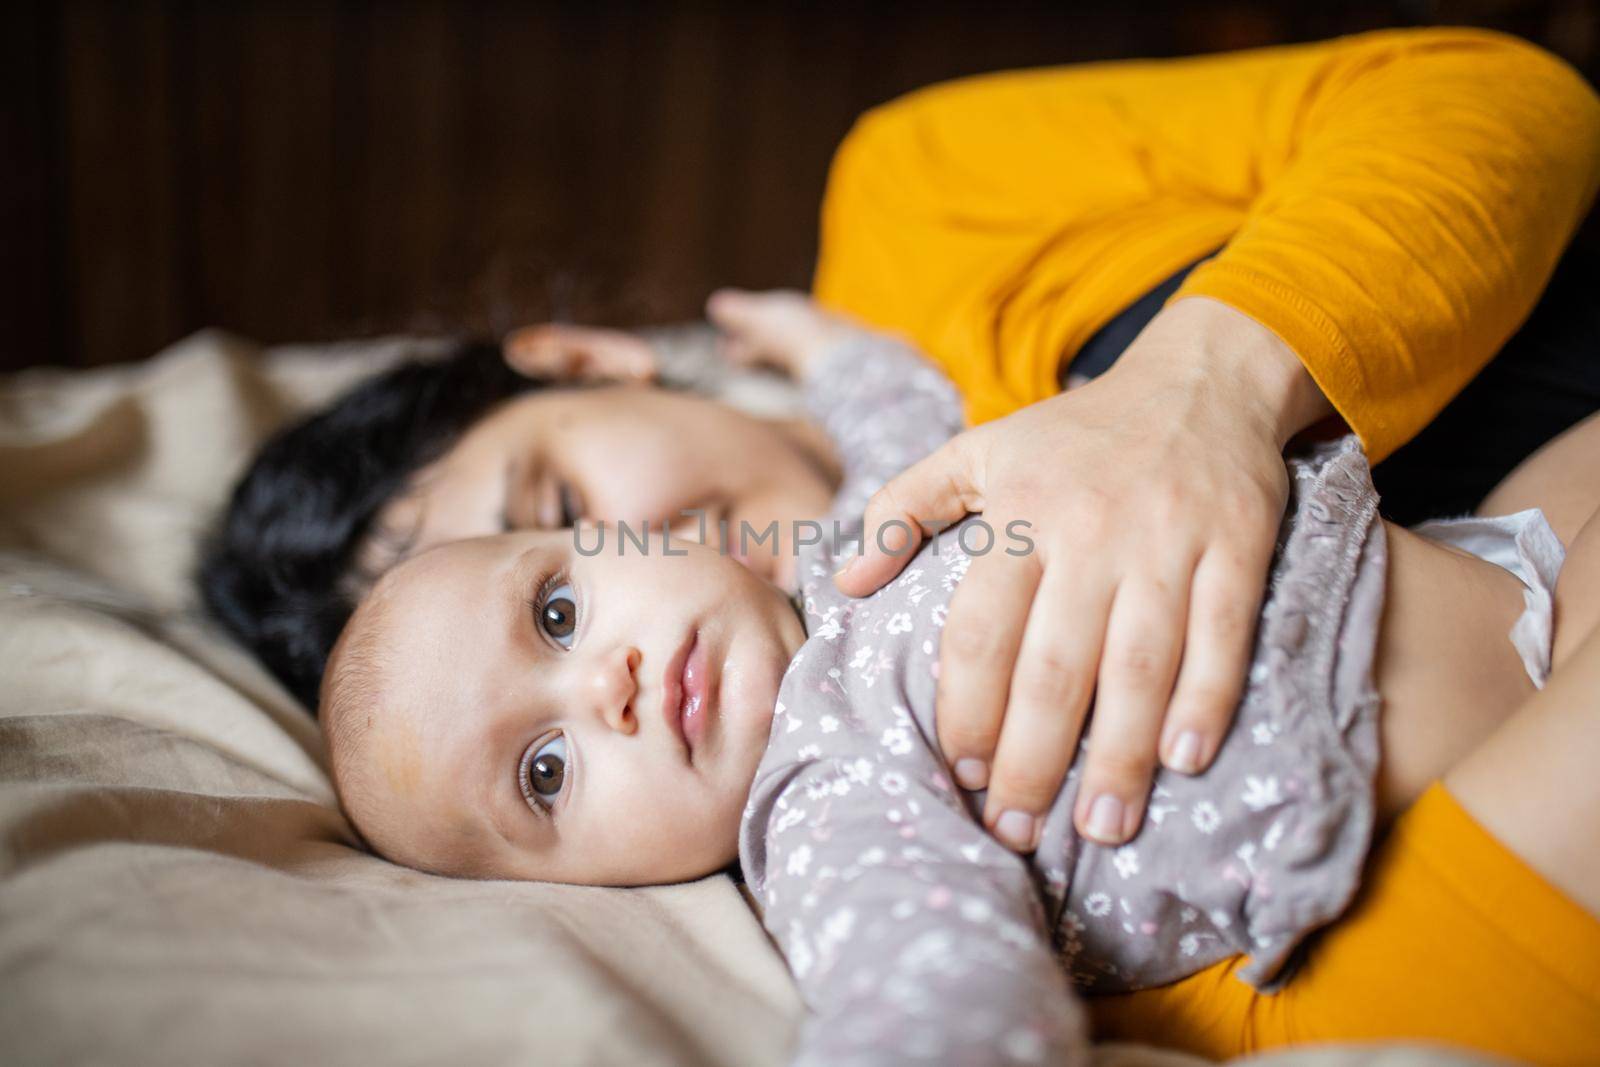 Cute baby lying down on bed next to her sleeping mother. Young woman wearing yellow clothing on bed and tenderly hugging adorable baby. Lovely maternity